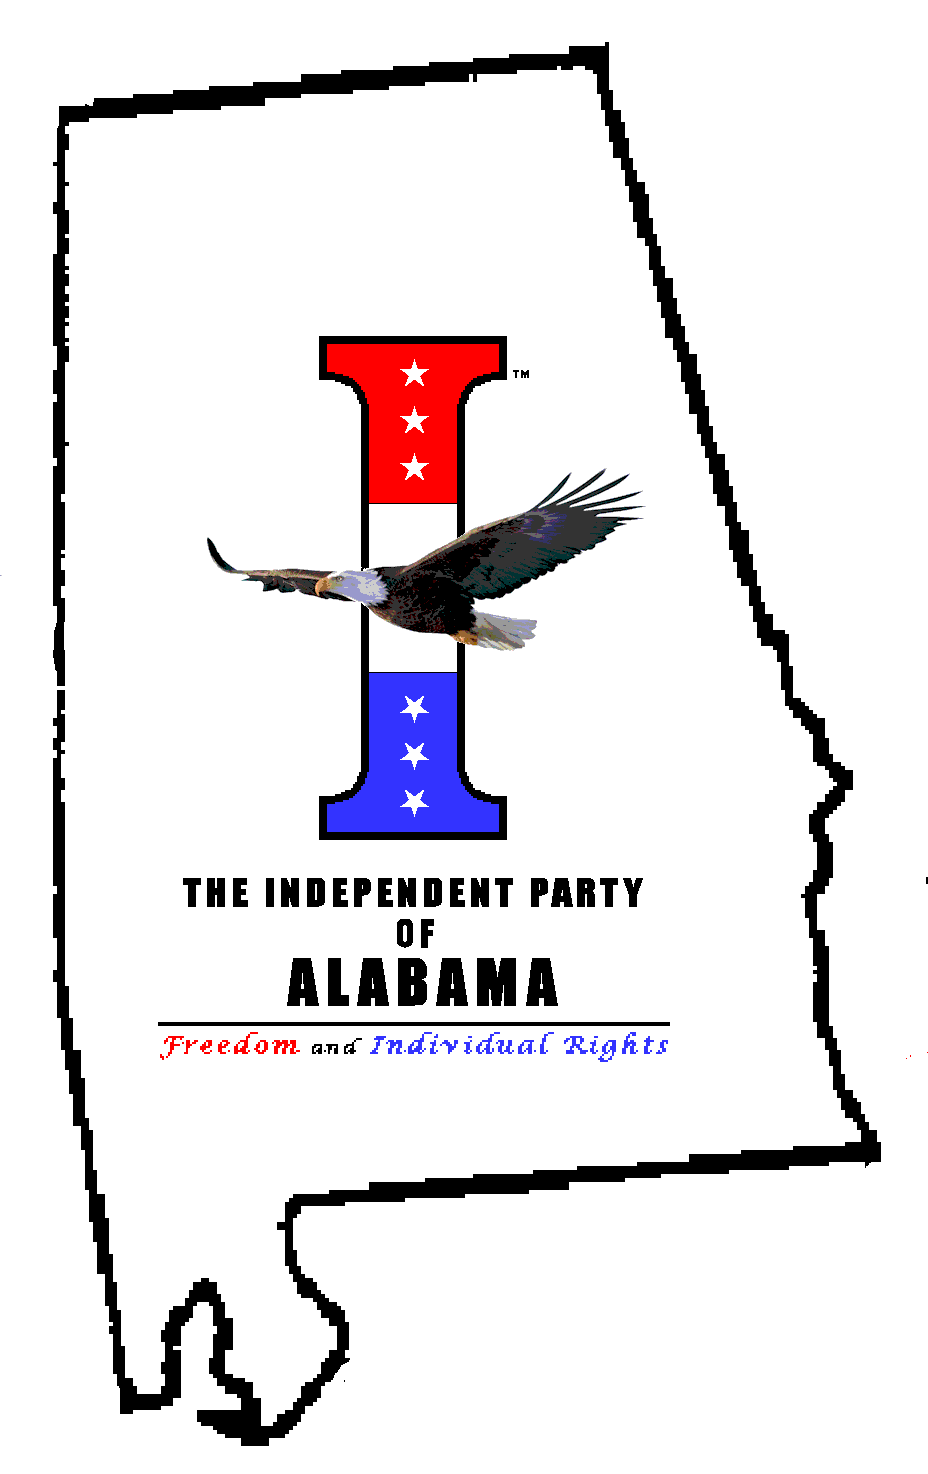 The Independent Party of Alabama!